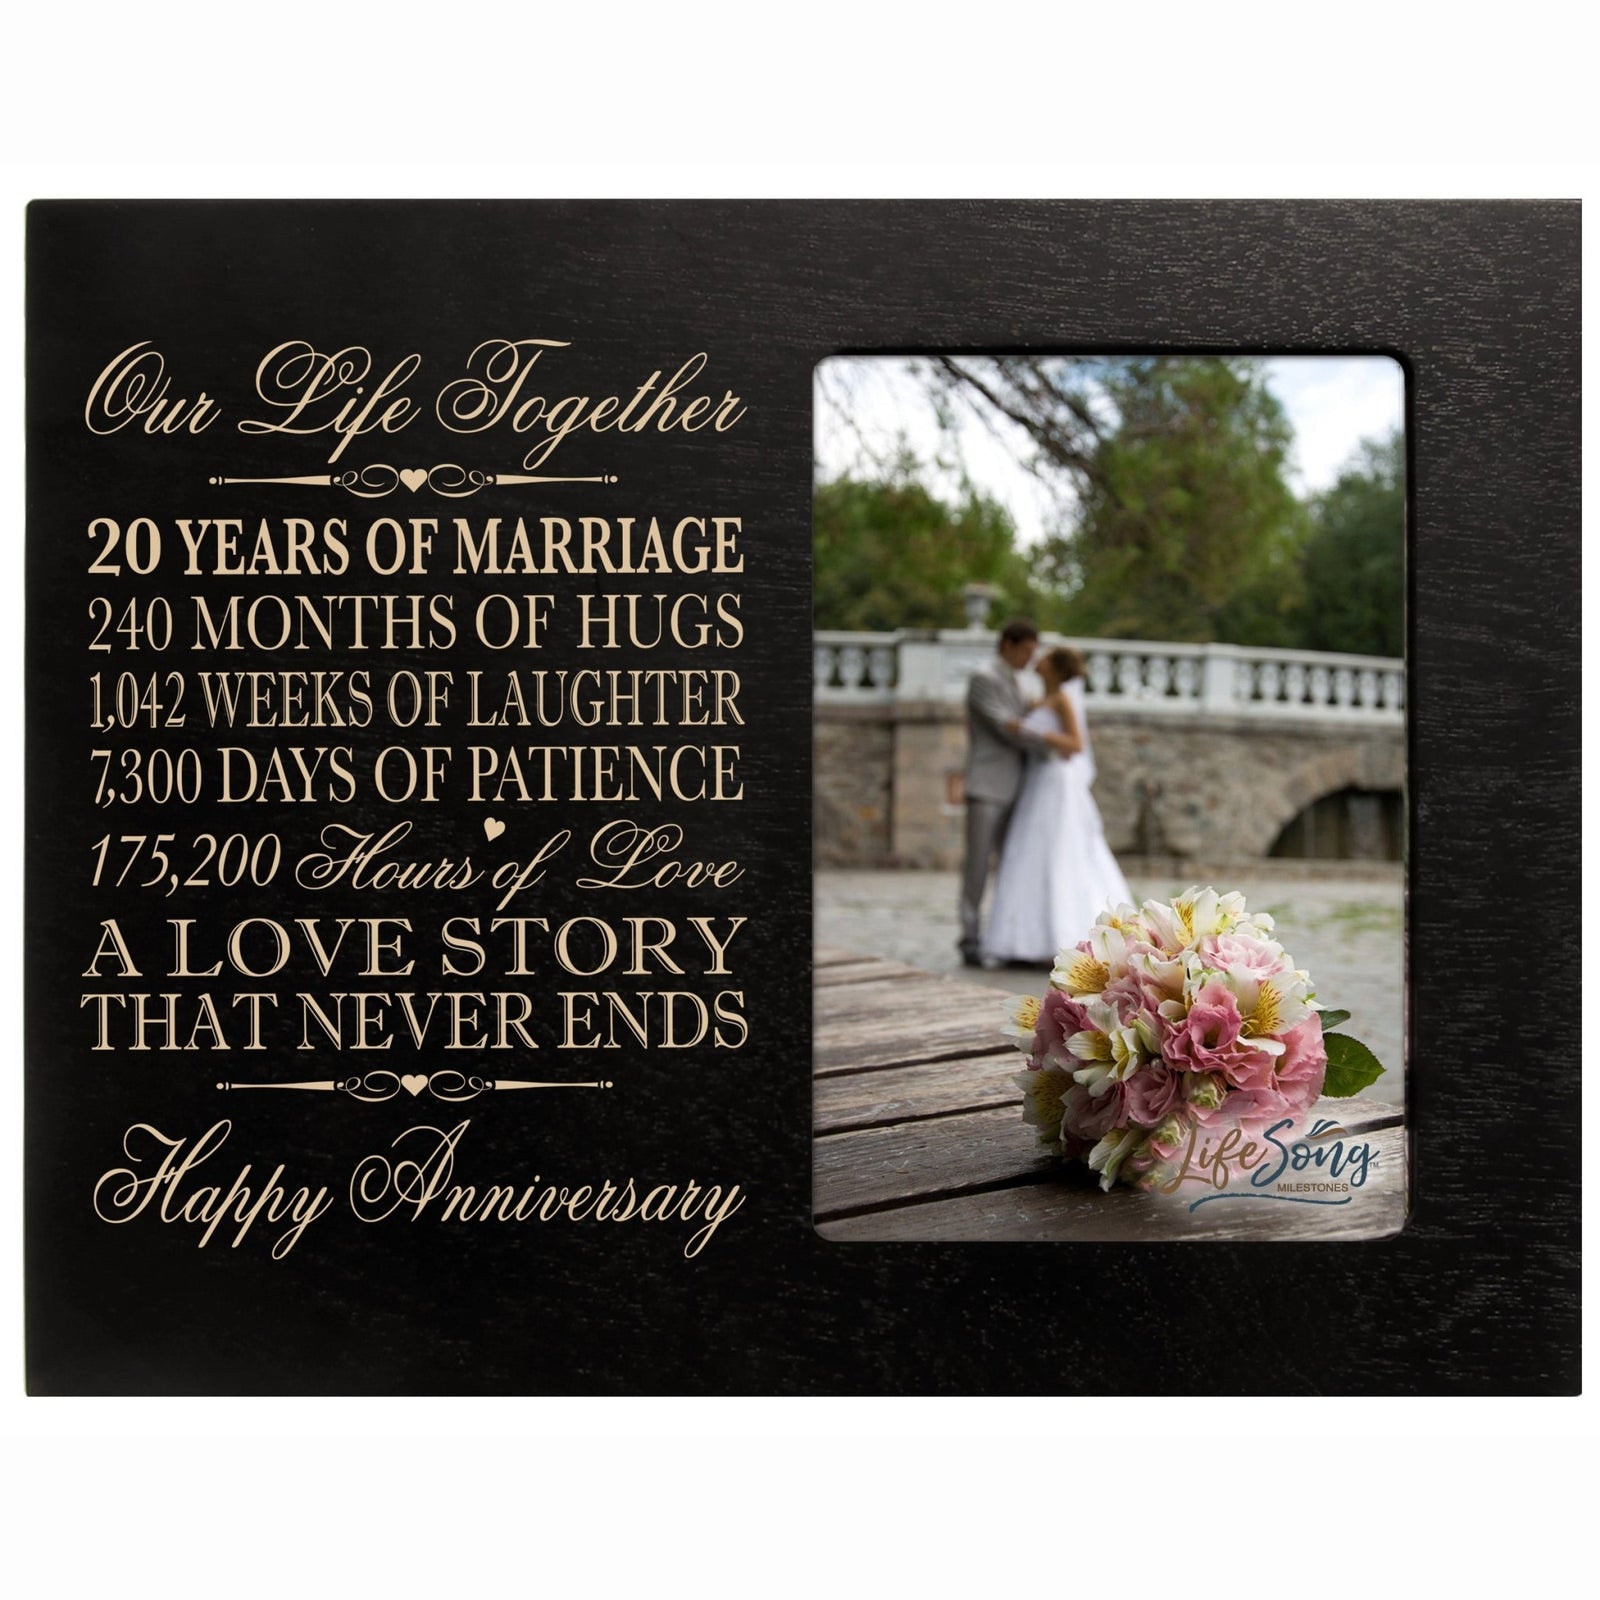 Lifesong Milestones Personalized Couples 20th Wedding Anniversary Picture Frame Decorations